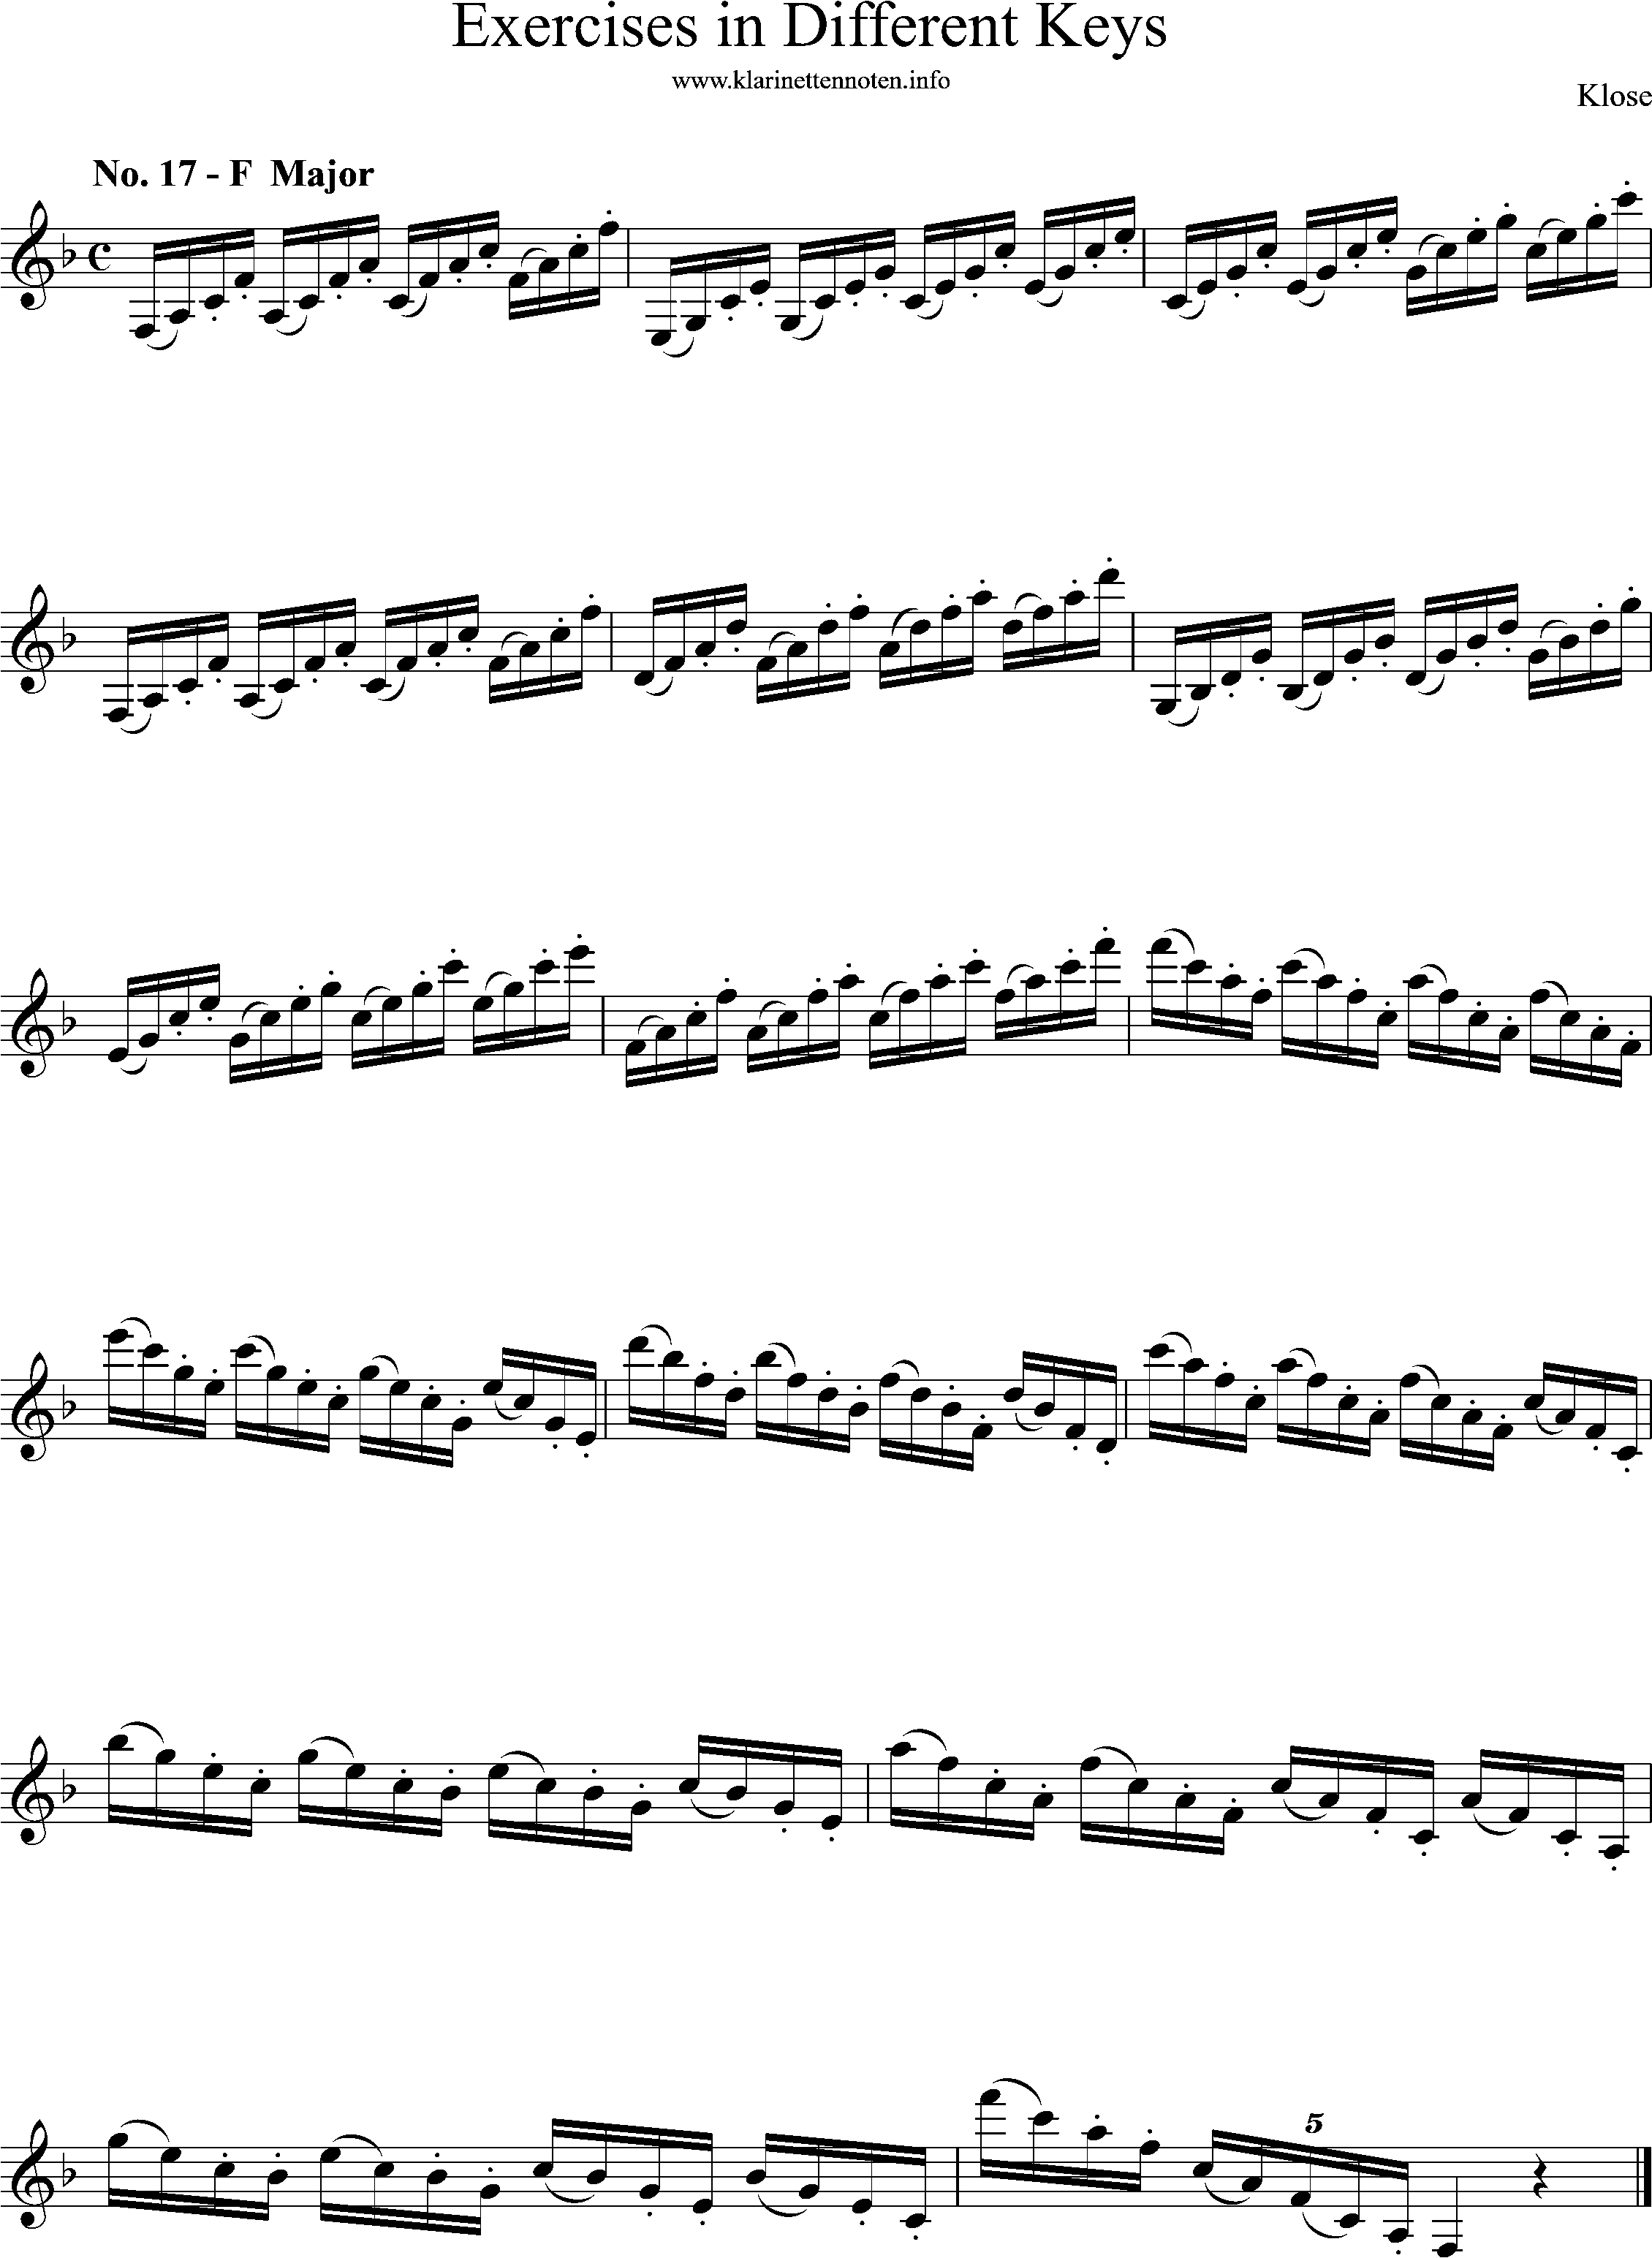 Exercises in Differewnt Keys, klose, No-17, F-Major